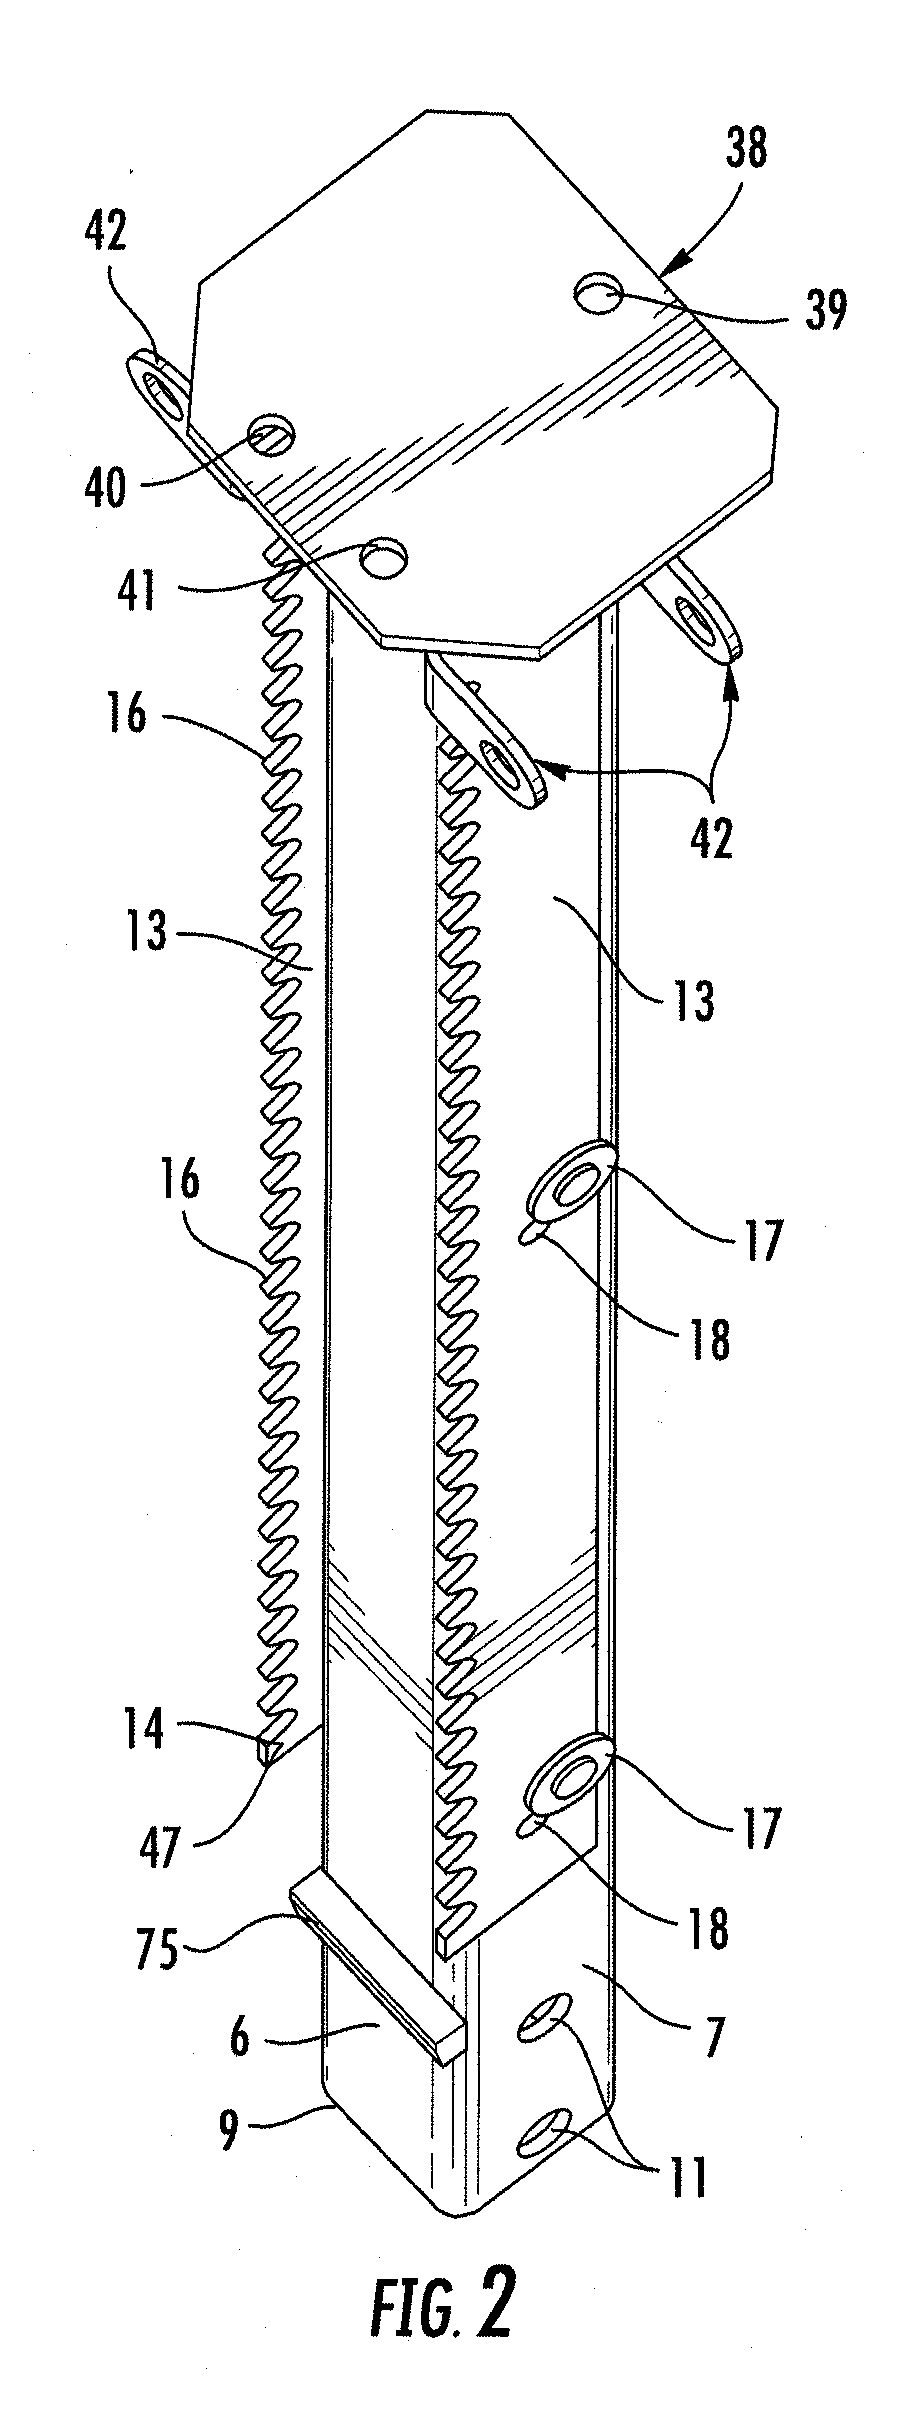 Apparatuses and methods for an improved vehicle jack